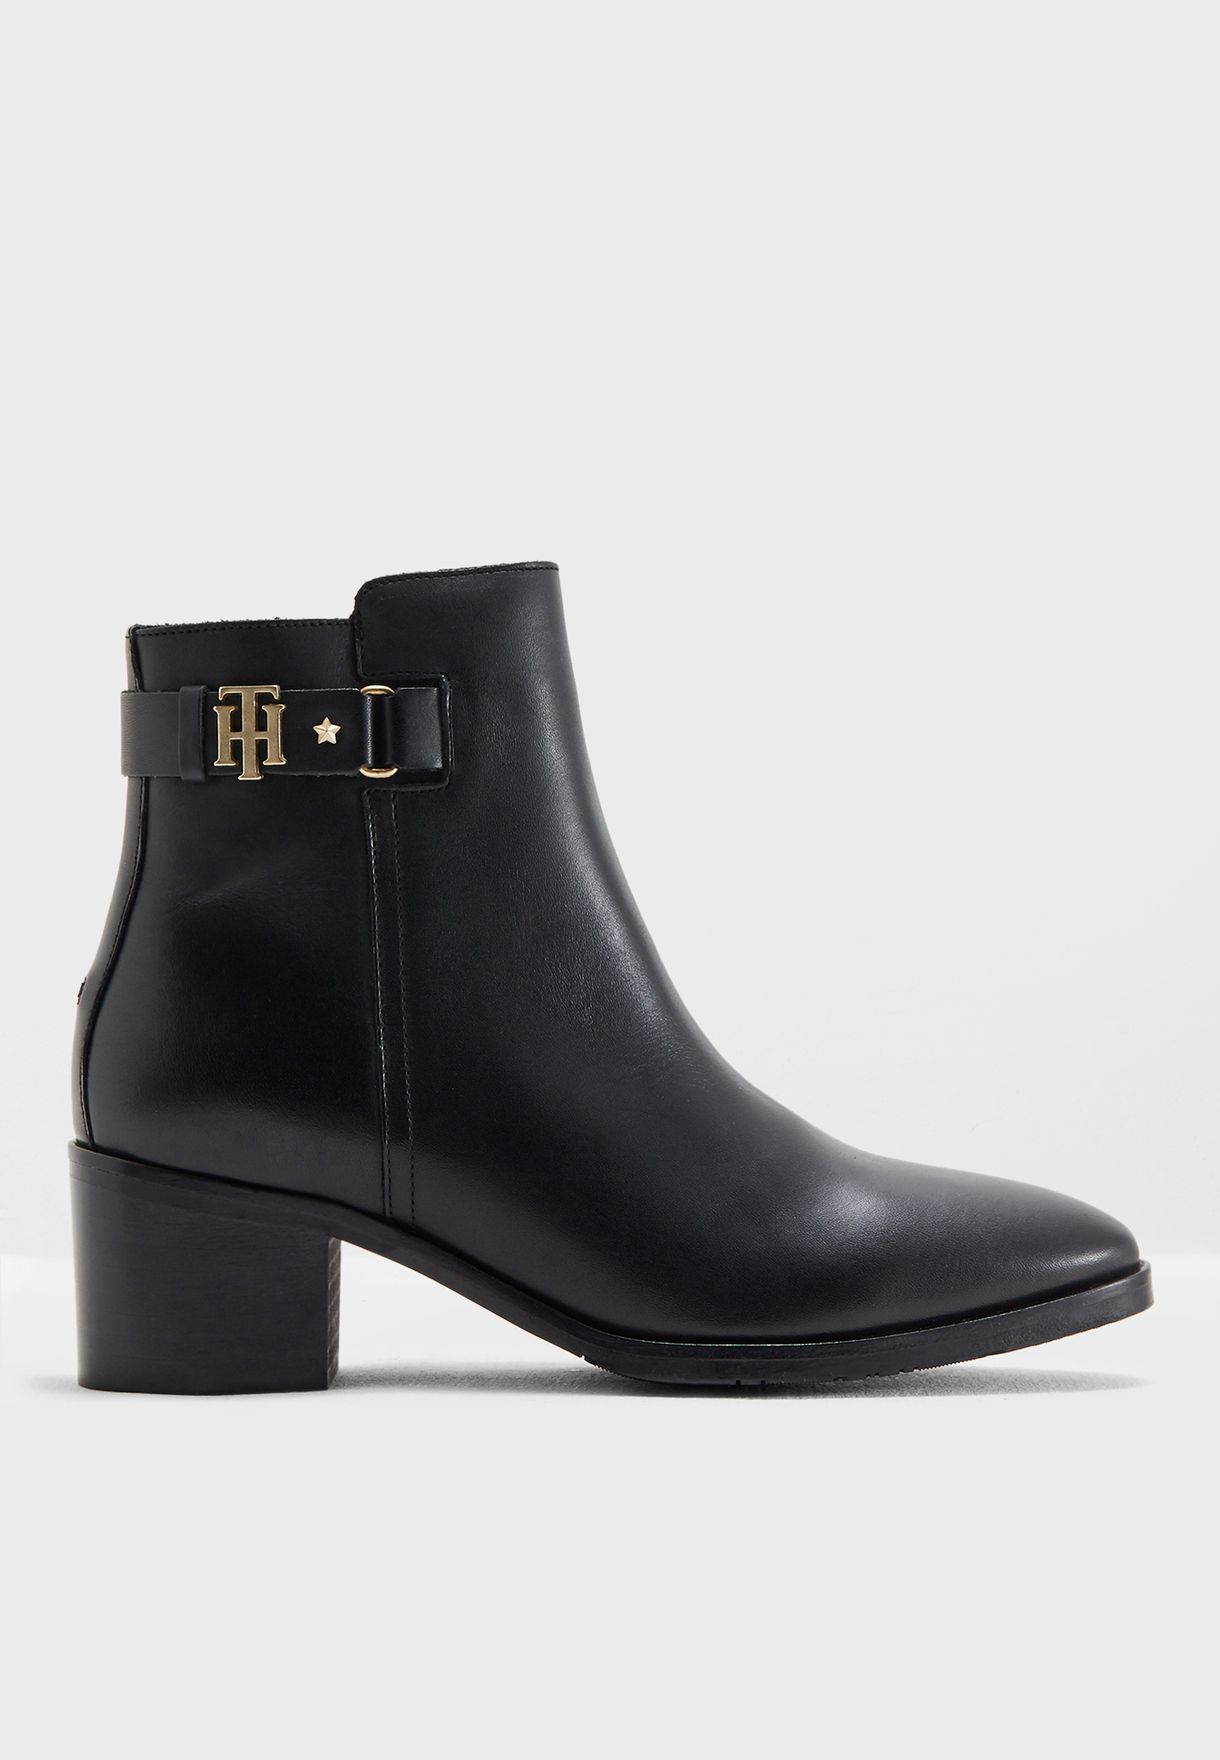 TH Buckle Mid Heel Boot Leather 